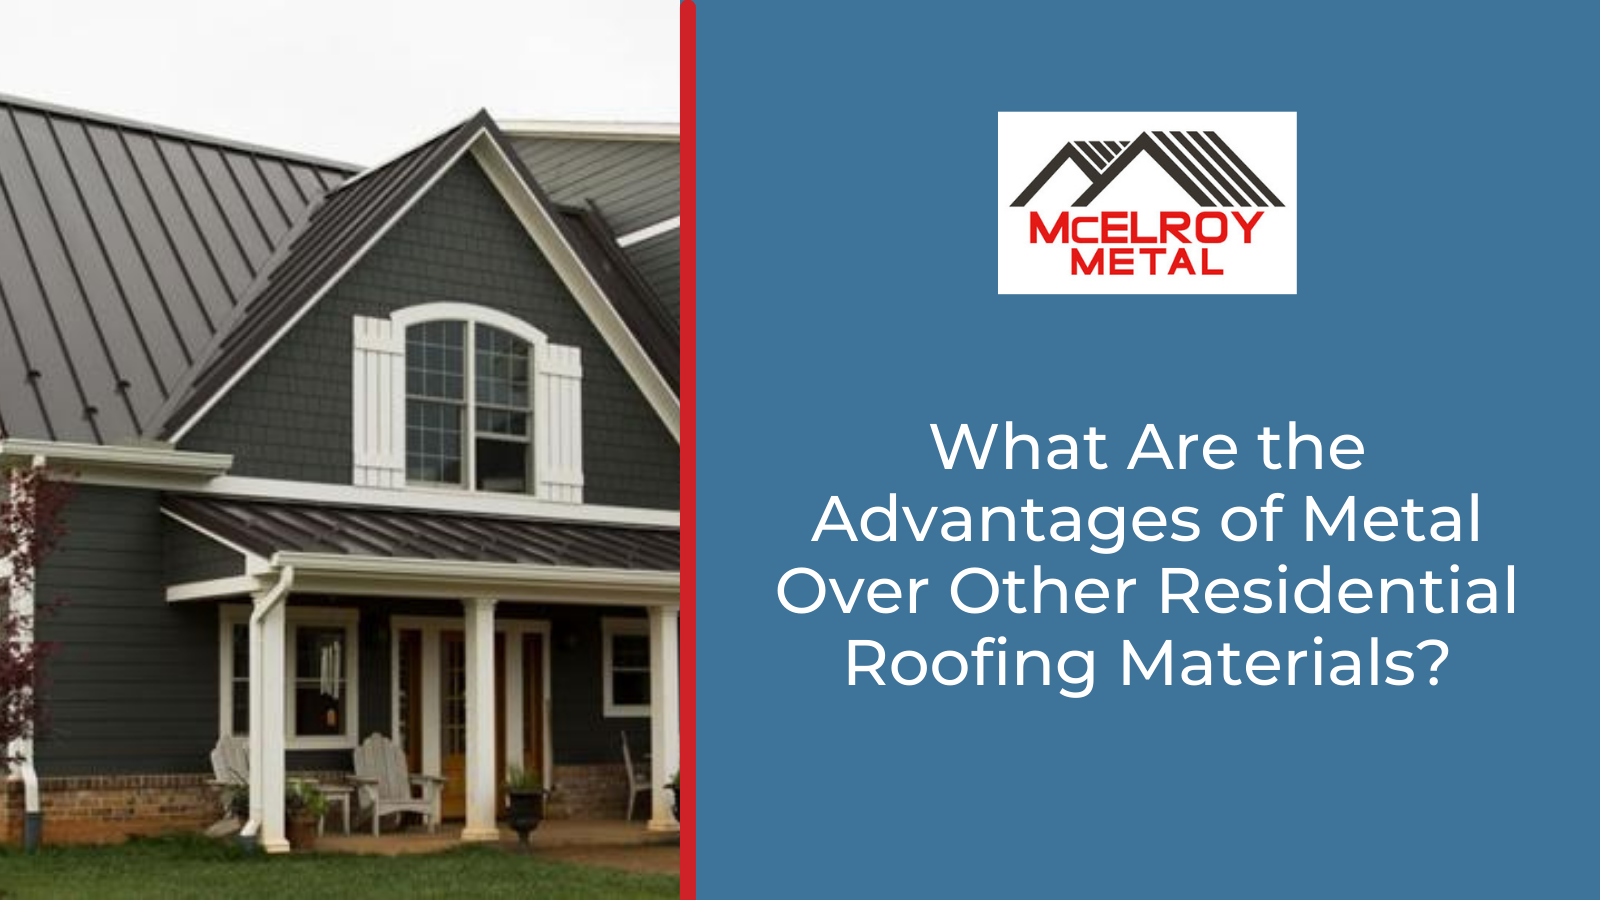 What Are the Advantages of Metal Over Other Residential Roofing Materials?